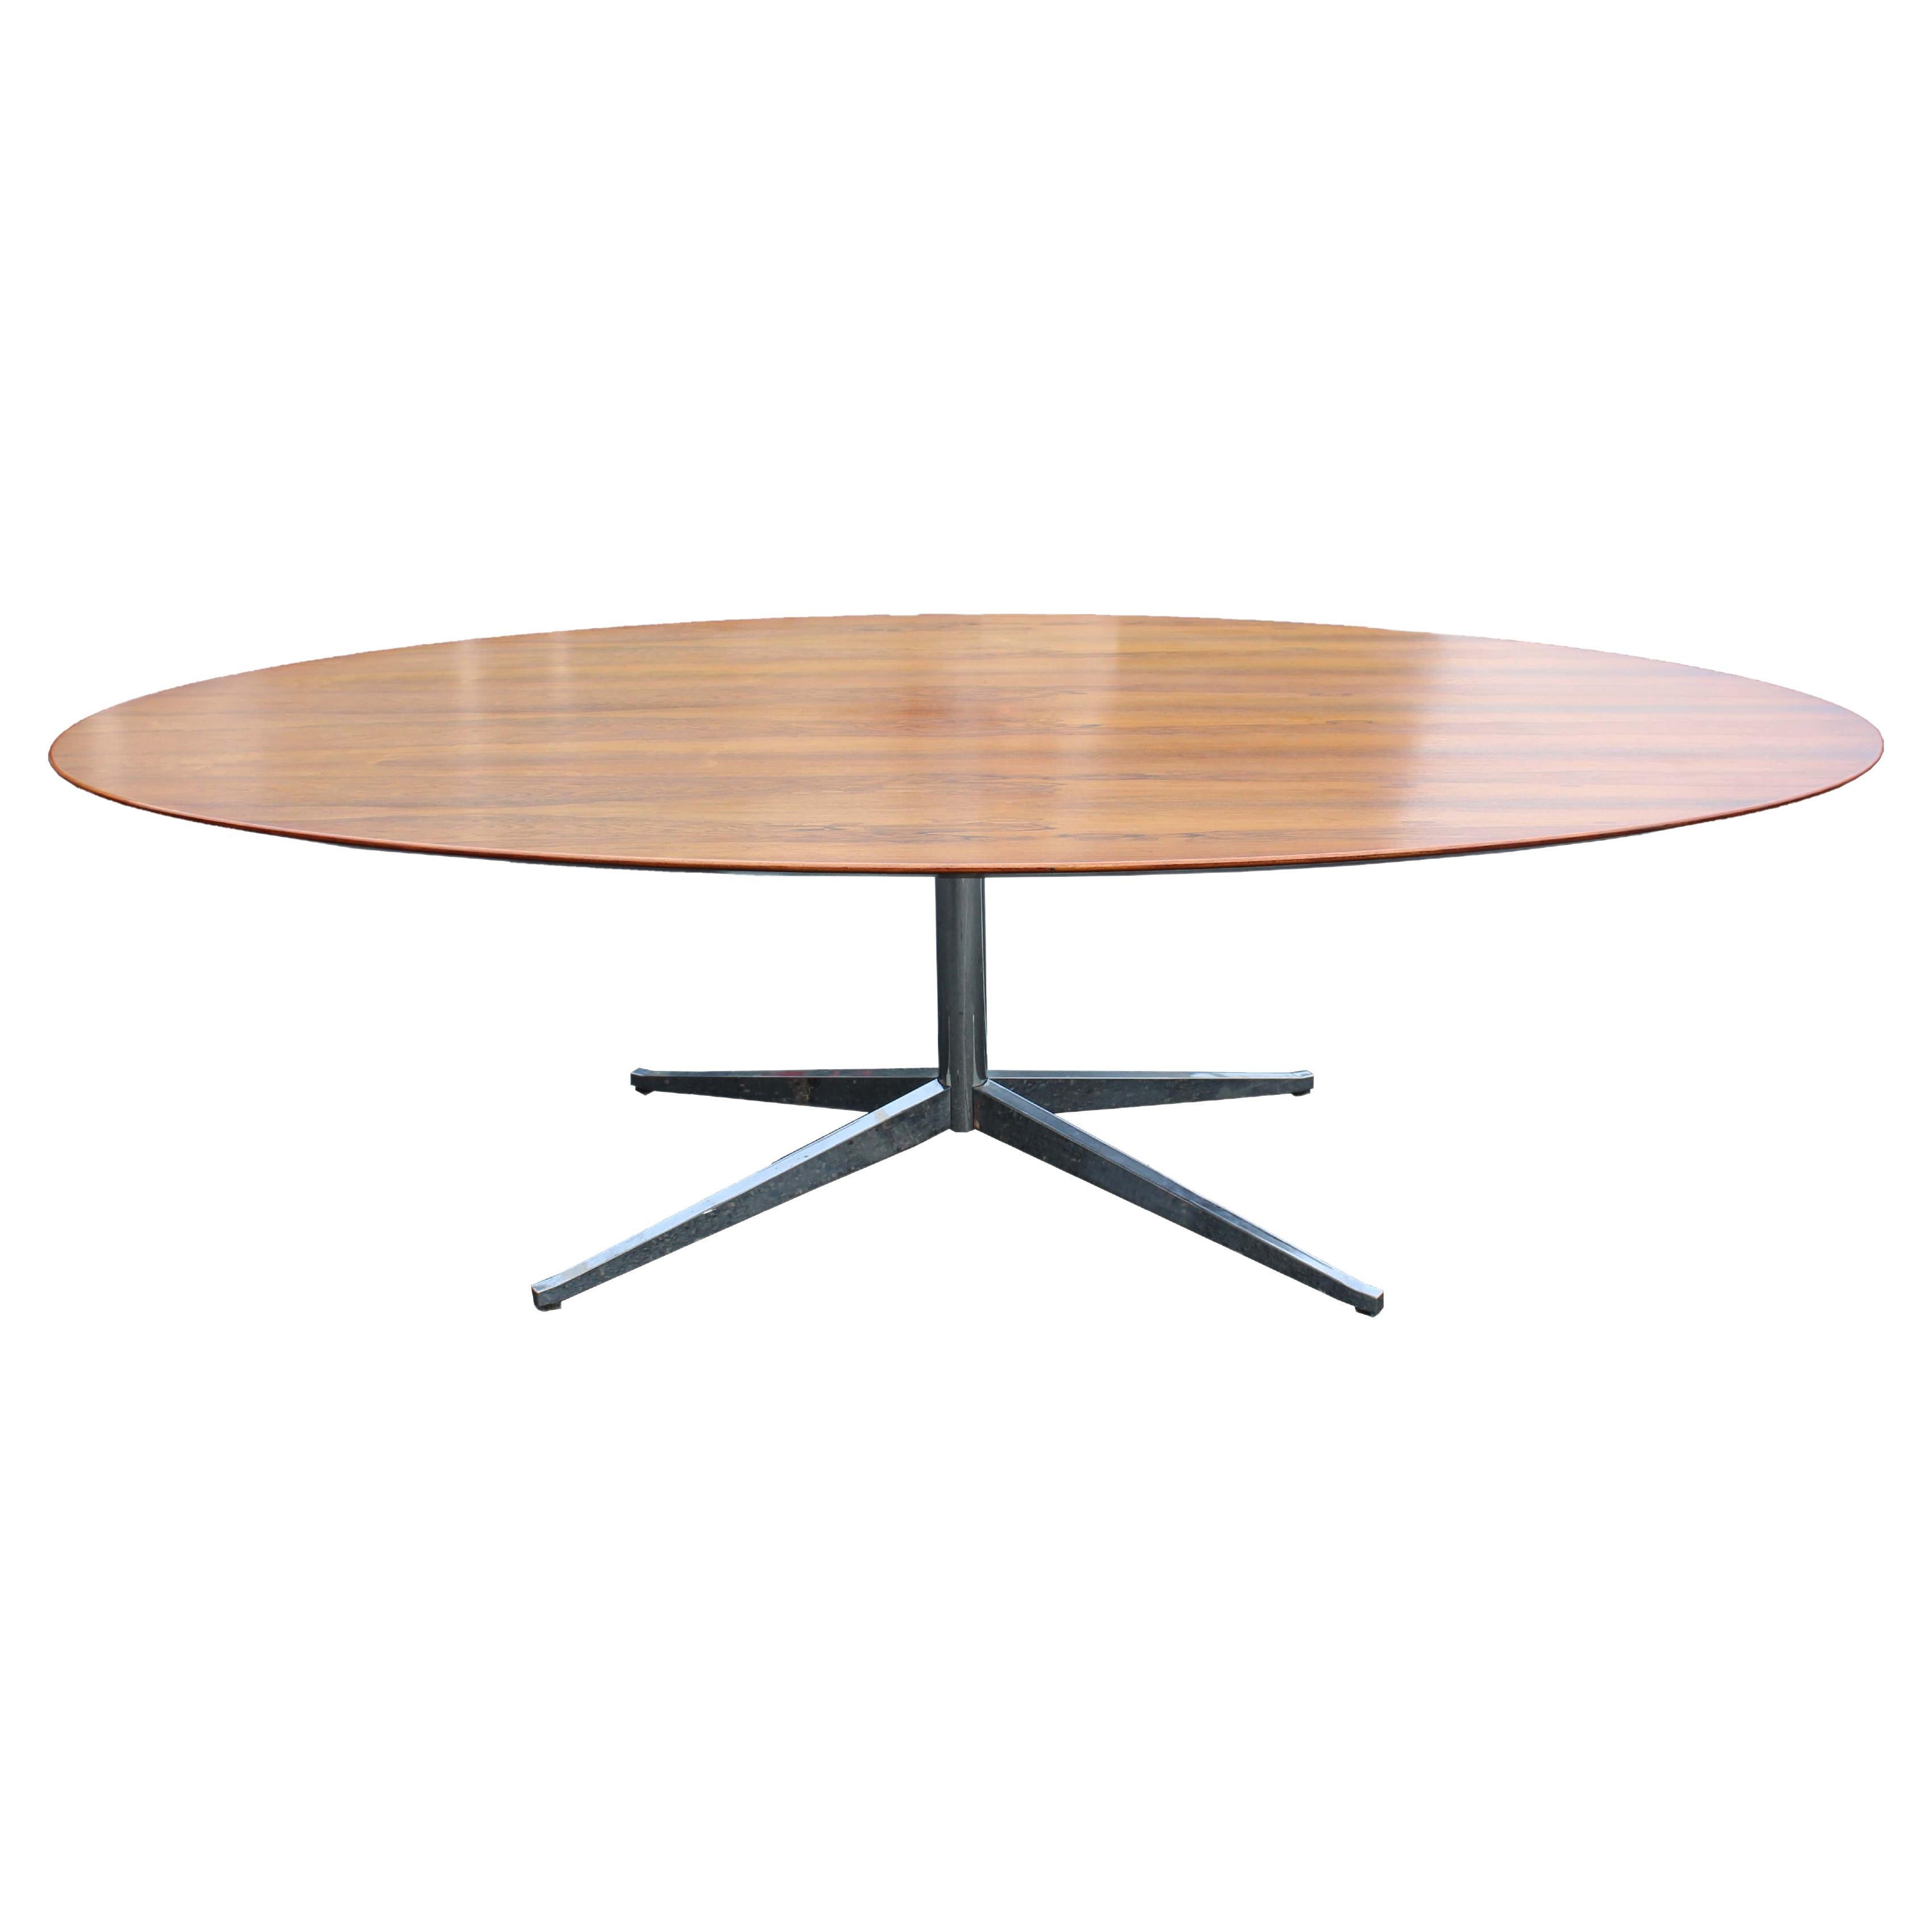 Mid-Century Modern Knoll Rosewood Oval Dining Table with Chrome Base